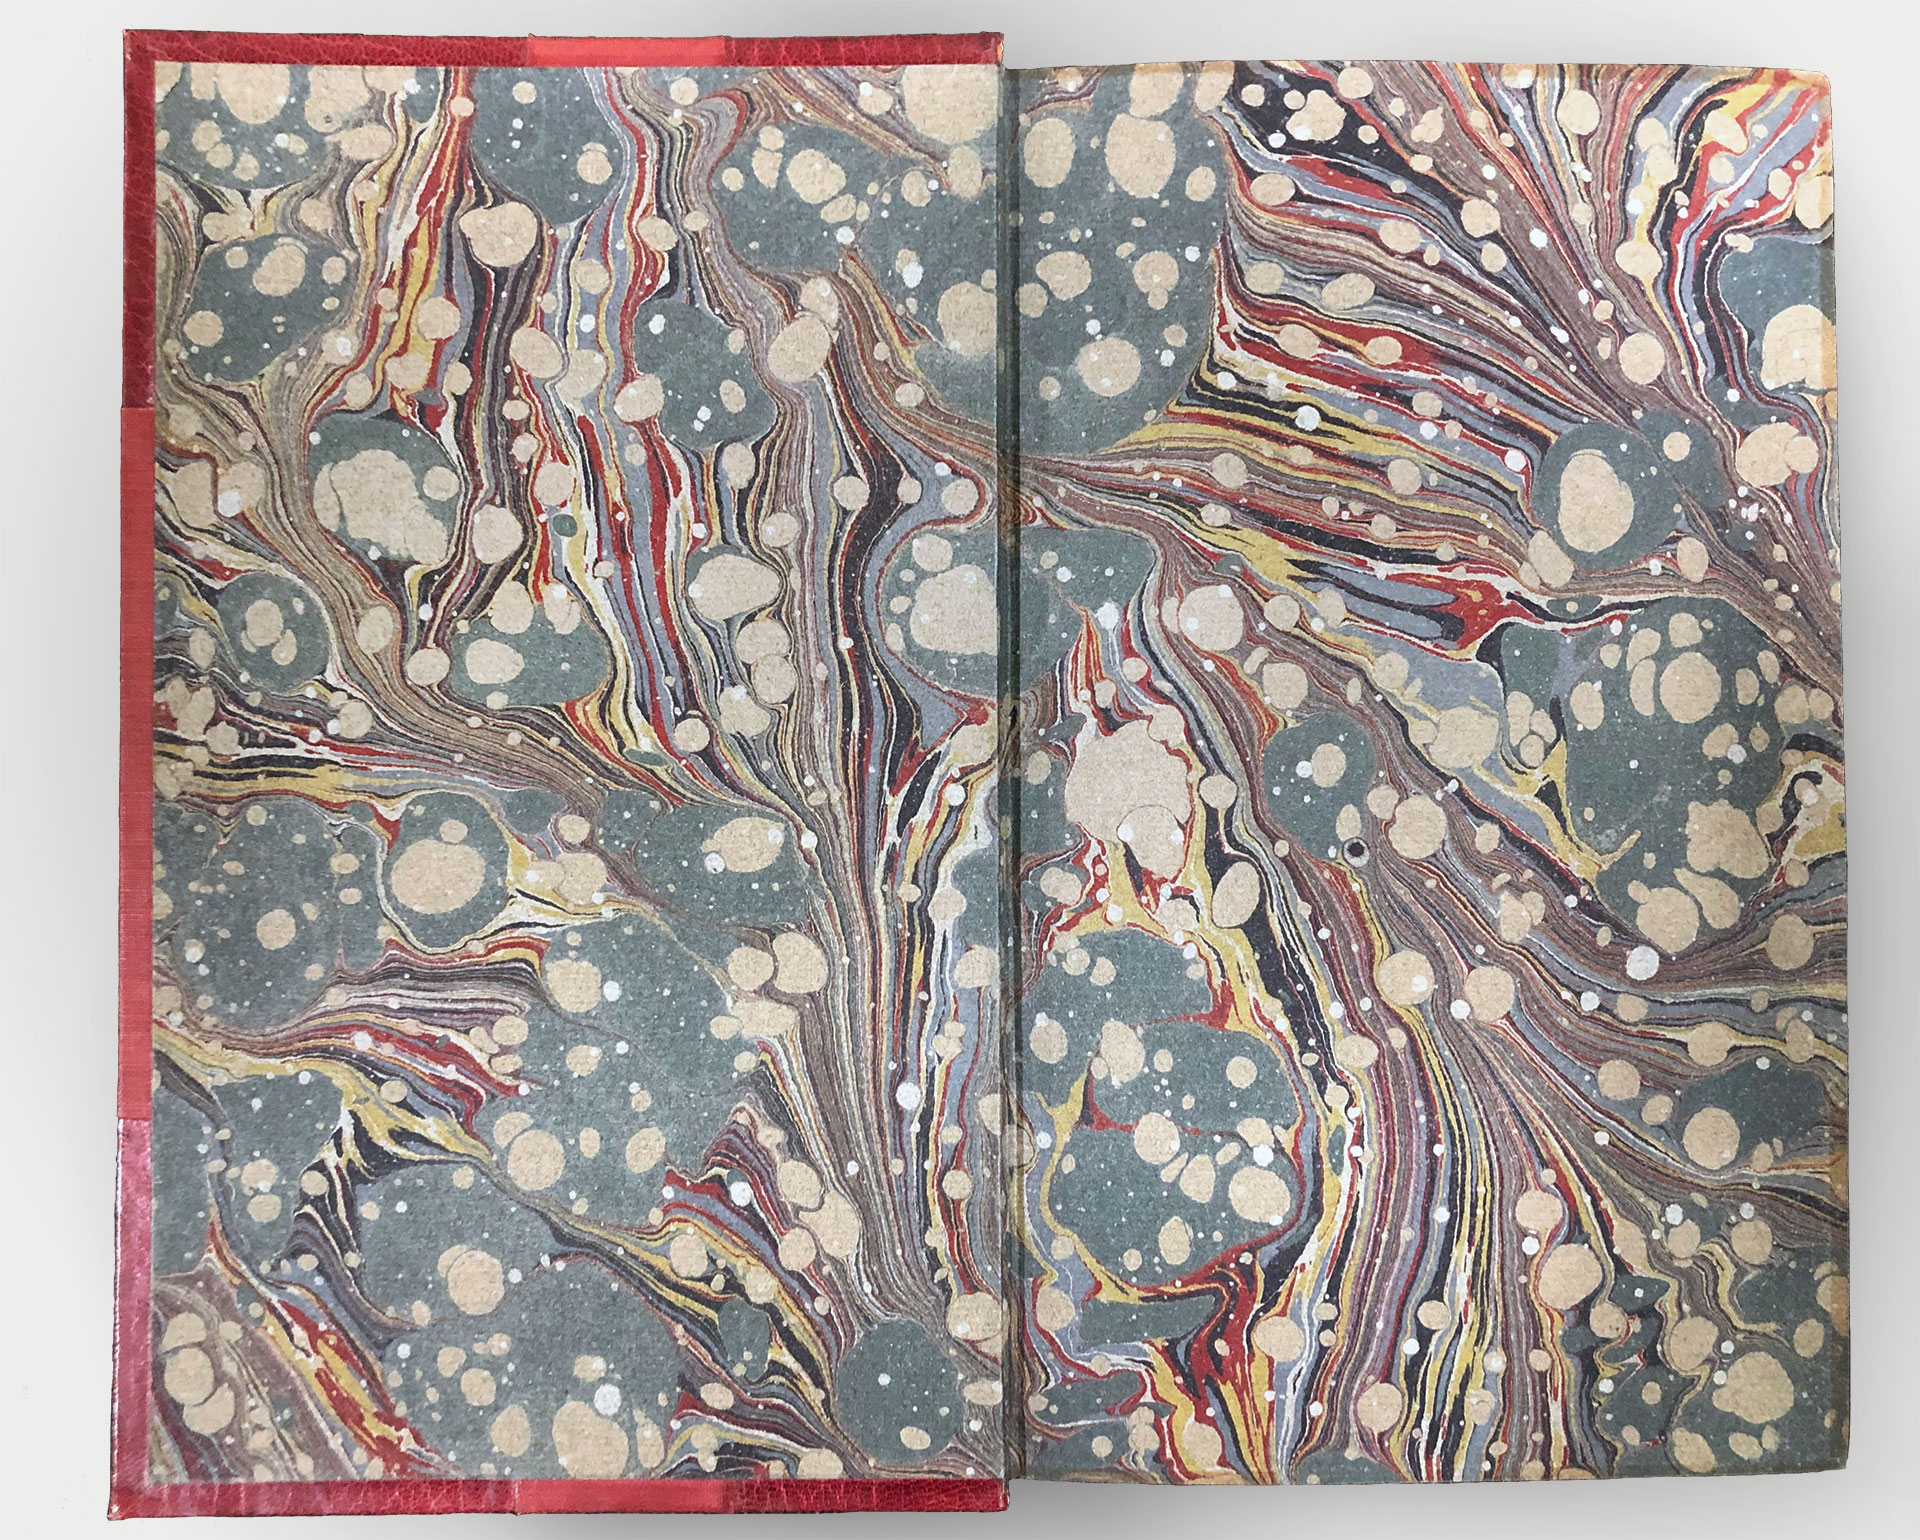 Endpapers with a colourful but dimmed marbled pattern.